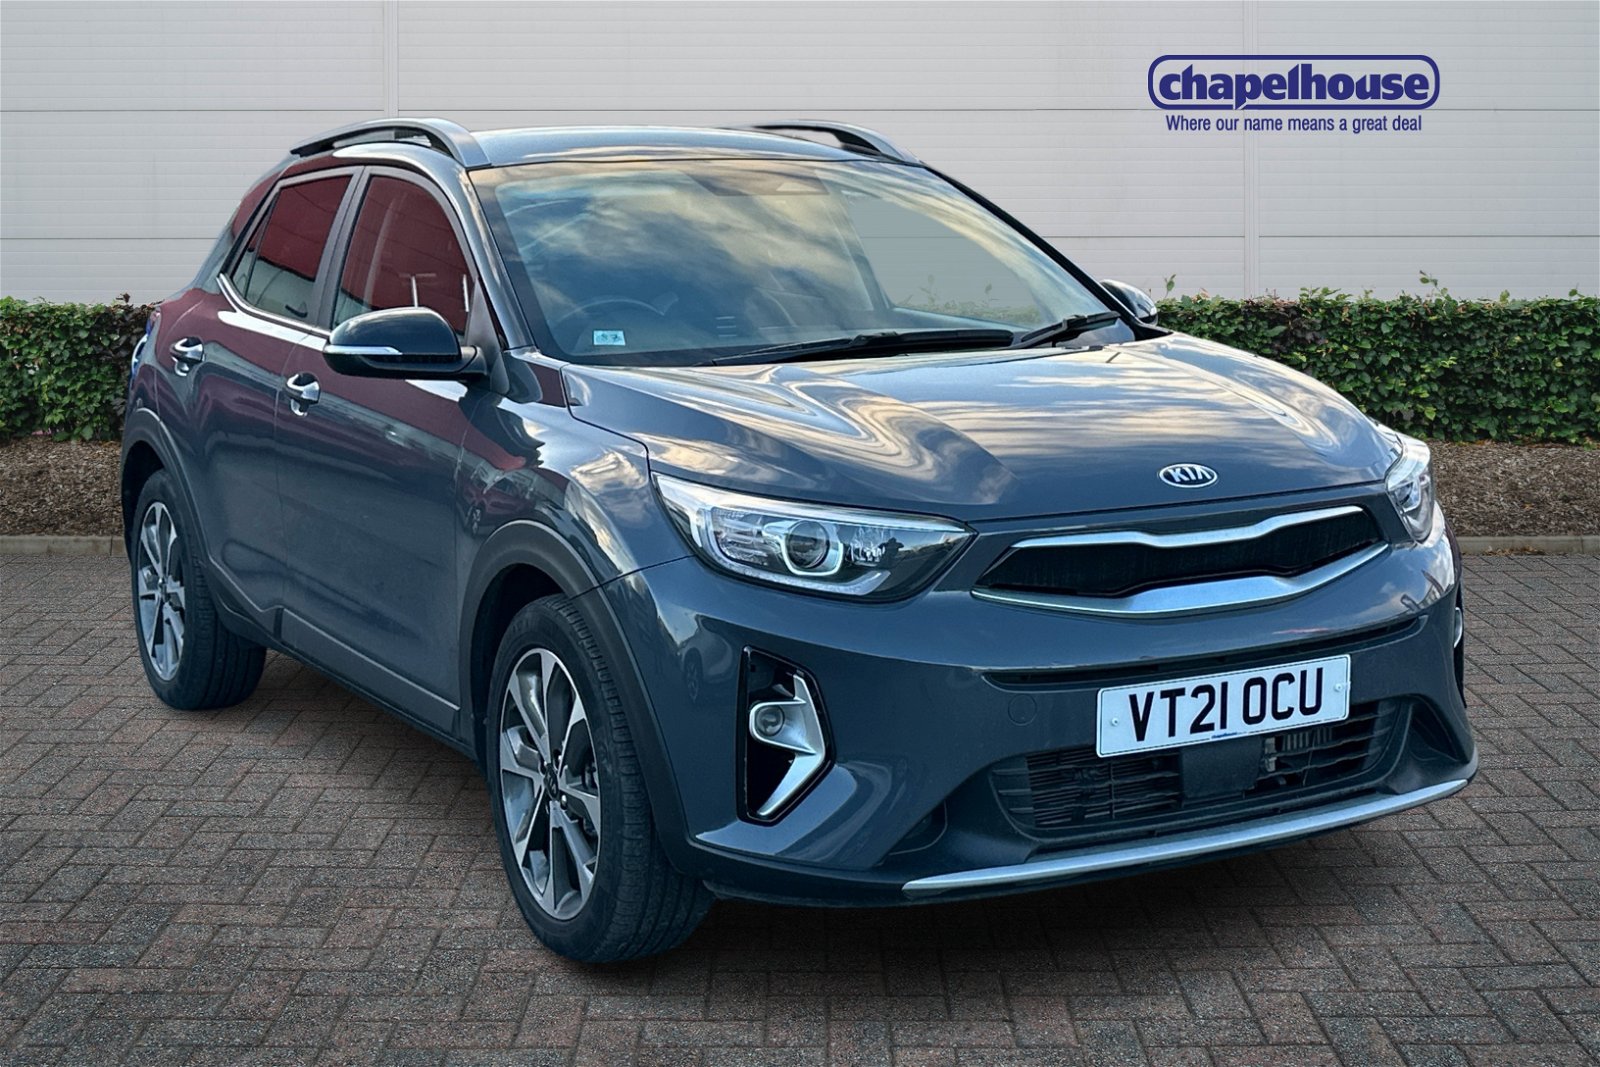 What makes the Kia Stonic perfect for first-time car buyers